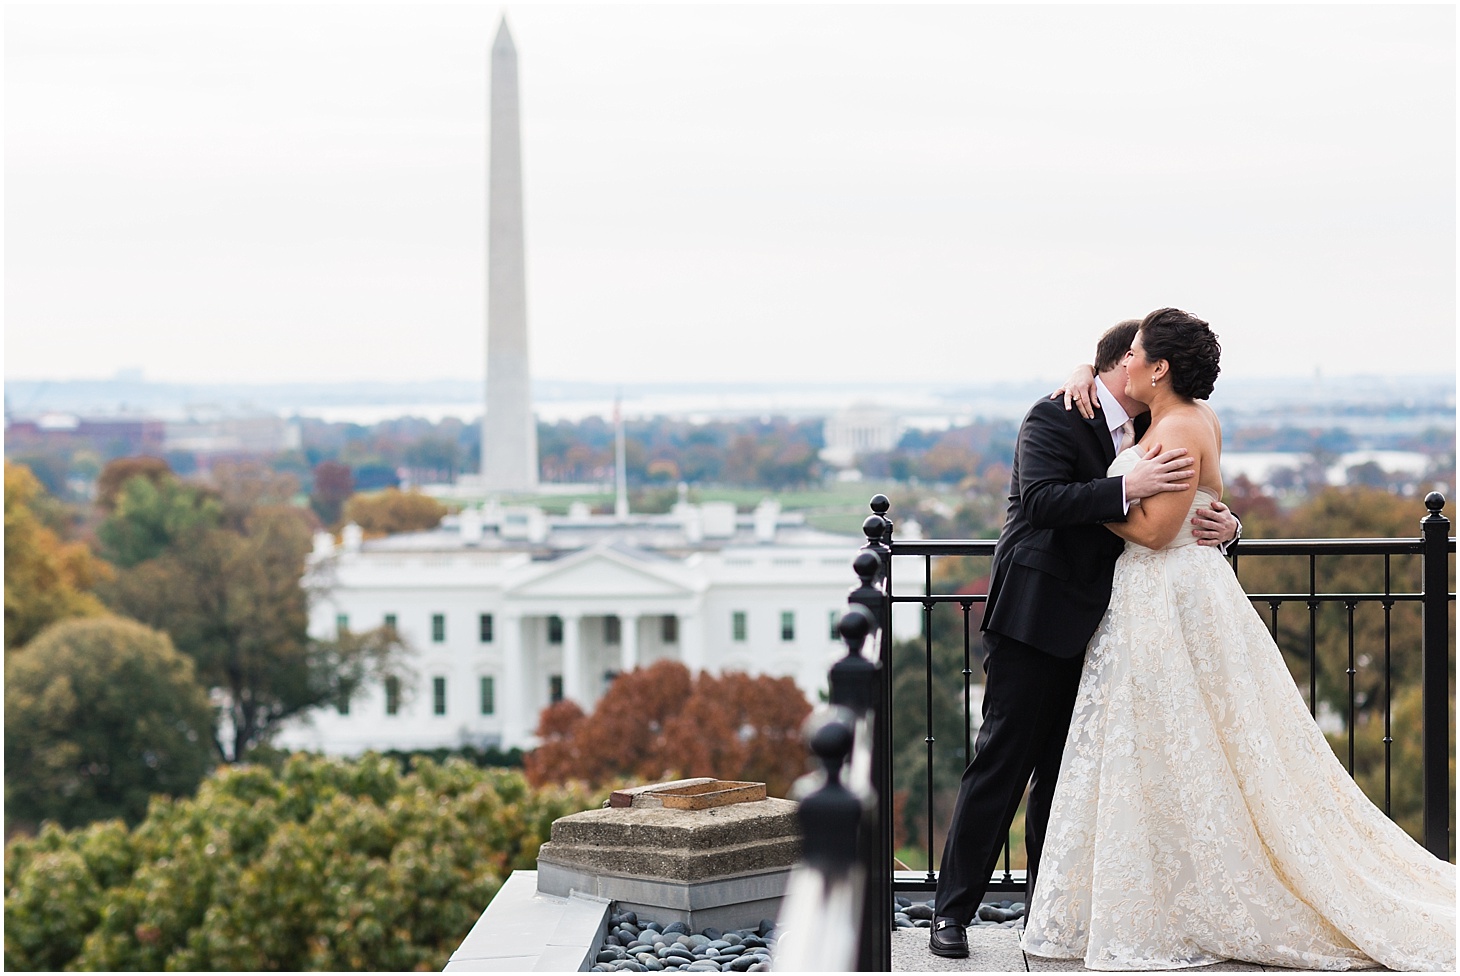 First Look on the rooftop of the Hay-Adams Hotel | Winter Brunch Wedding at Hay-Adams Hotel in DC | Sarah Bradshaw Photography